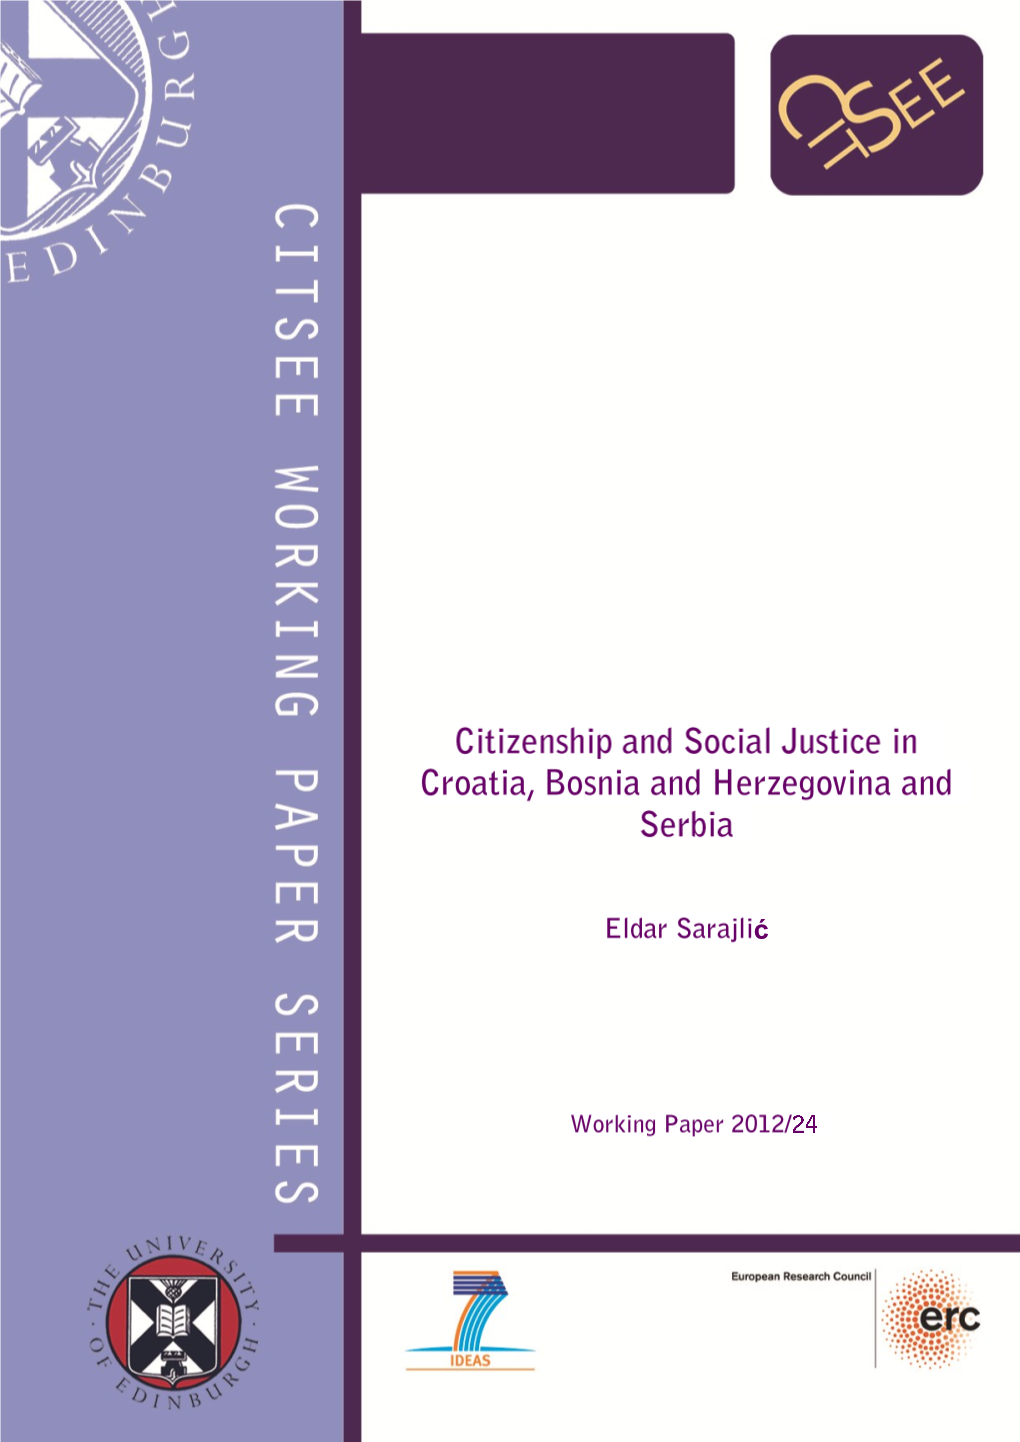 Citizenship and Social Justice in Croatia, Bosnia and Herzegovina and Serbia